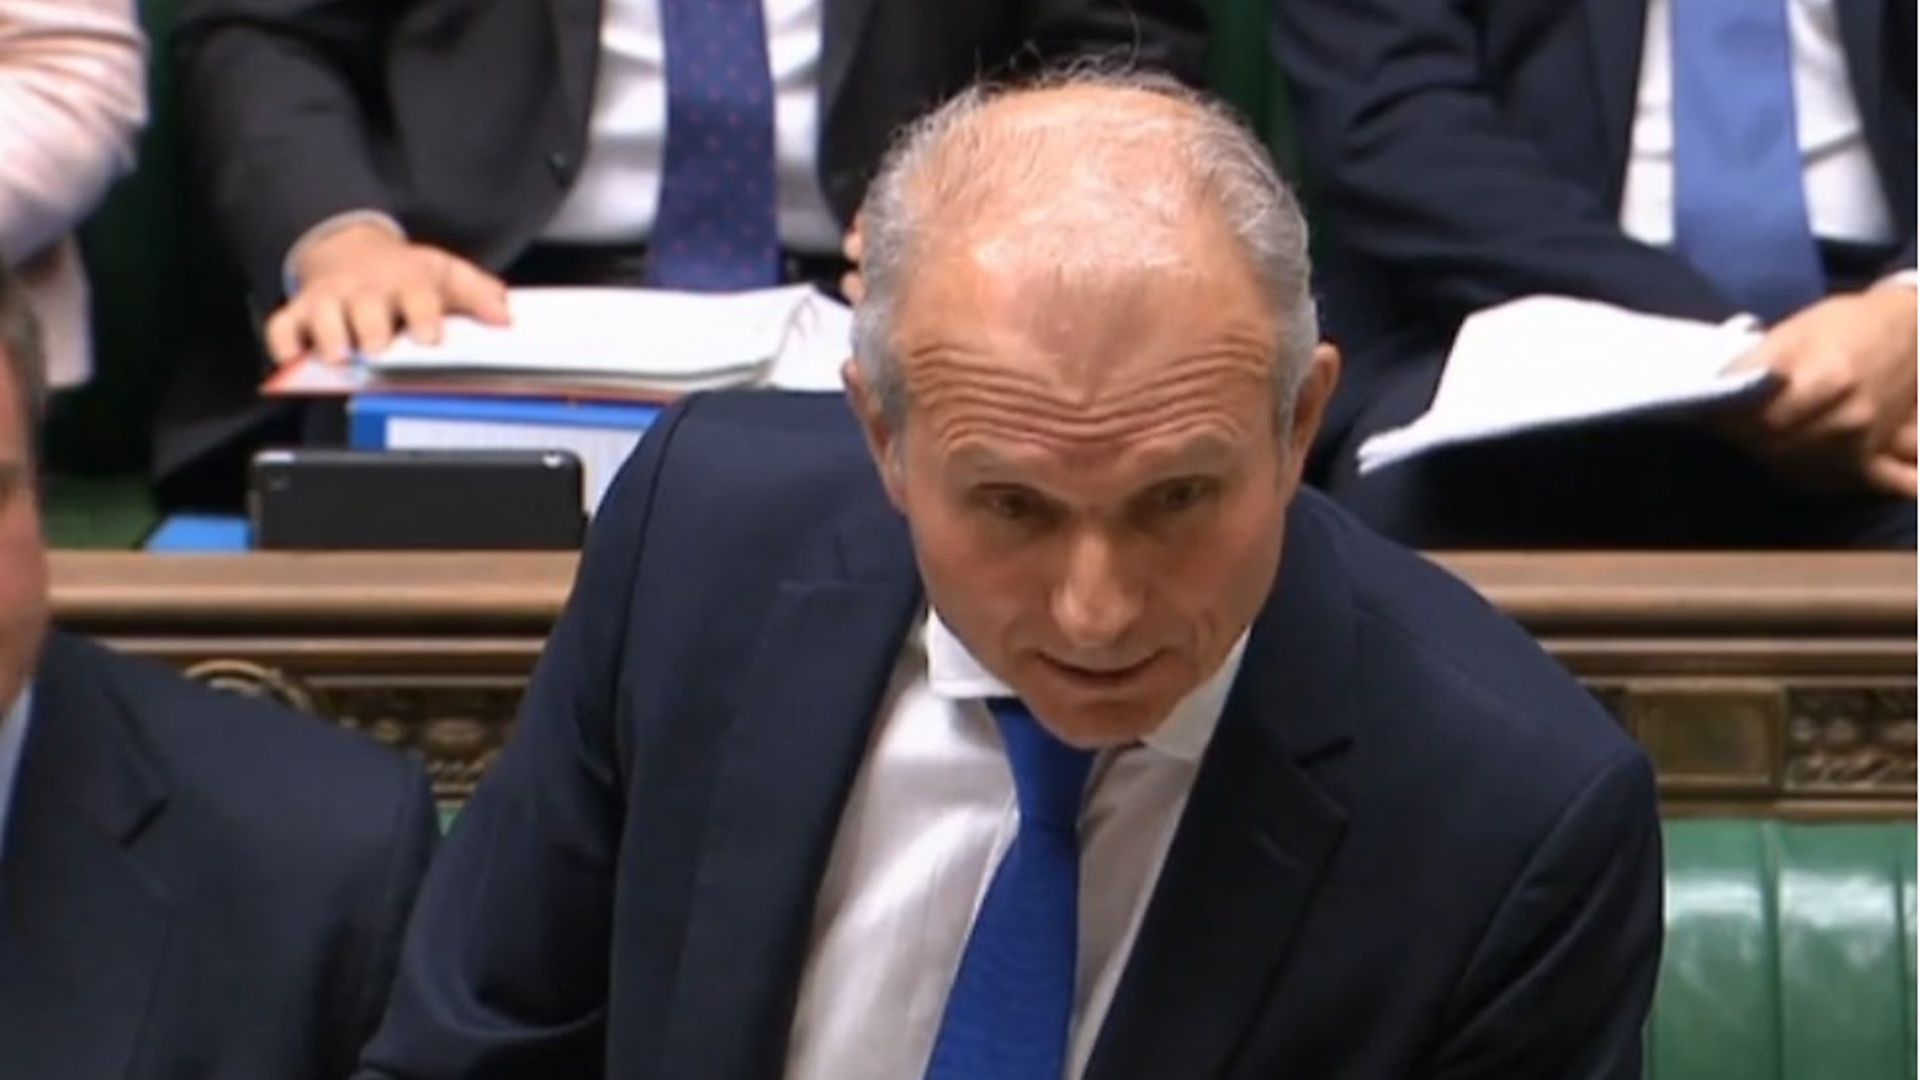 Former de facto deputy prime minister Sir David Lidington taking questions in the Commons - Credit: Parliament